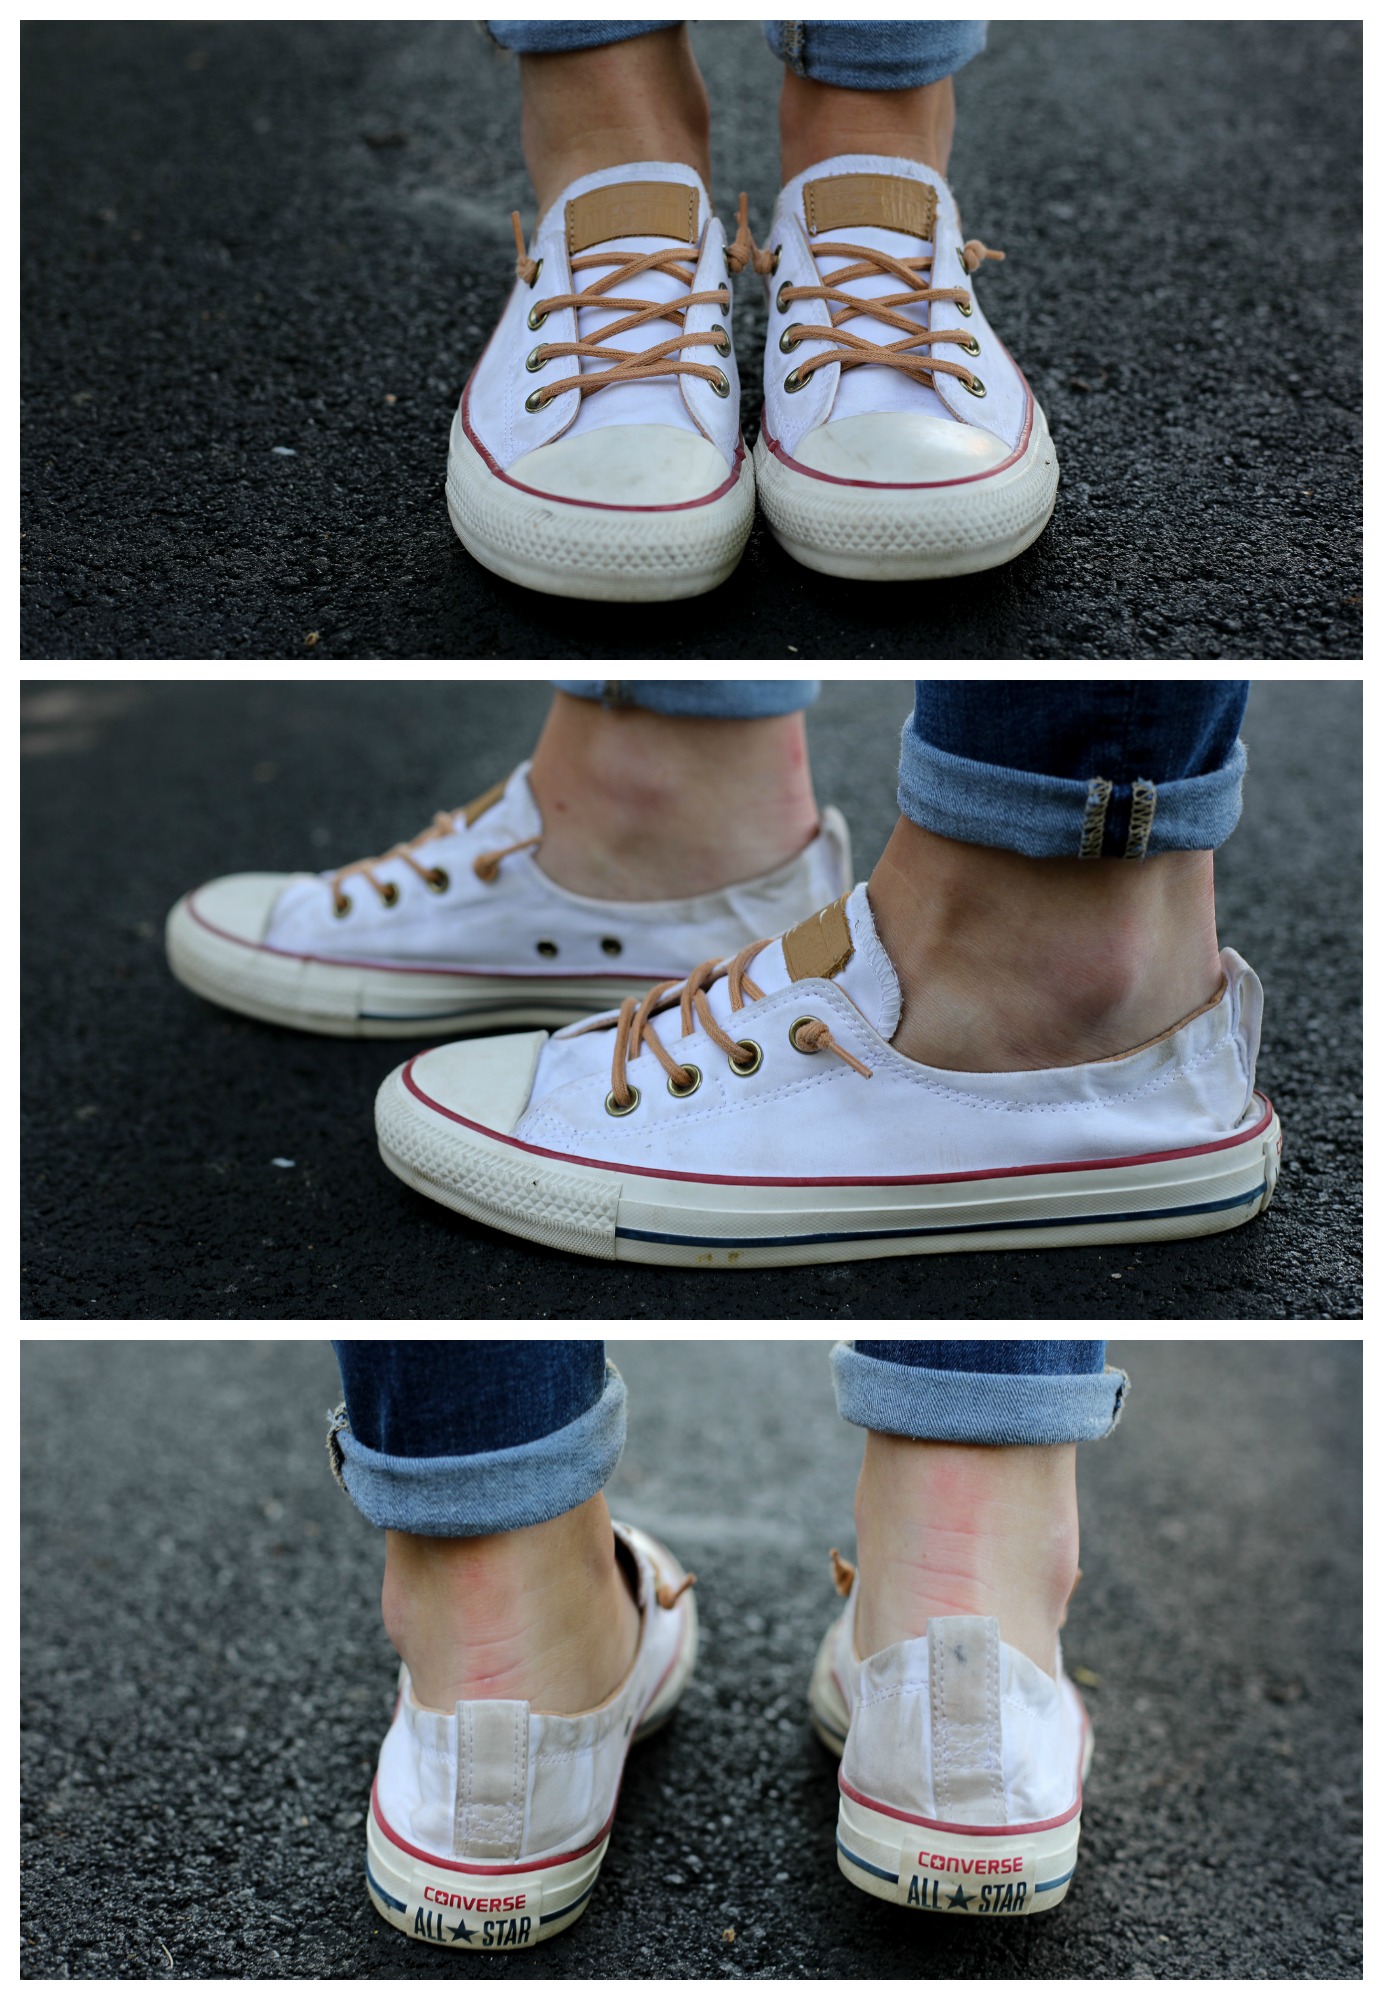 En el piso Encantador Interconectar How to Clean Your Converse [6 Methods Put To The Test!] - Living in Yellow